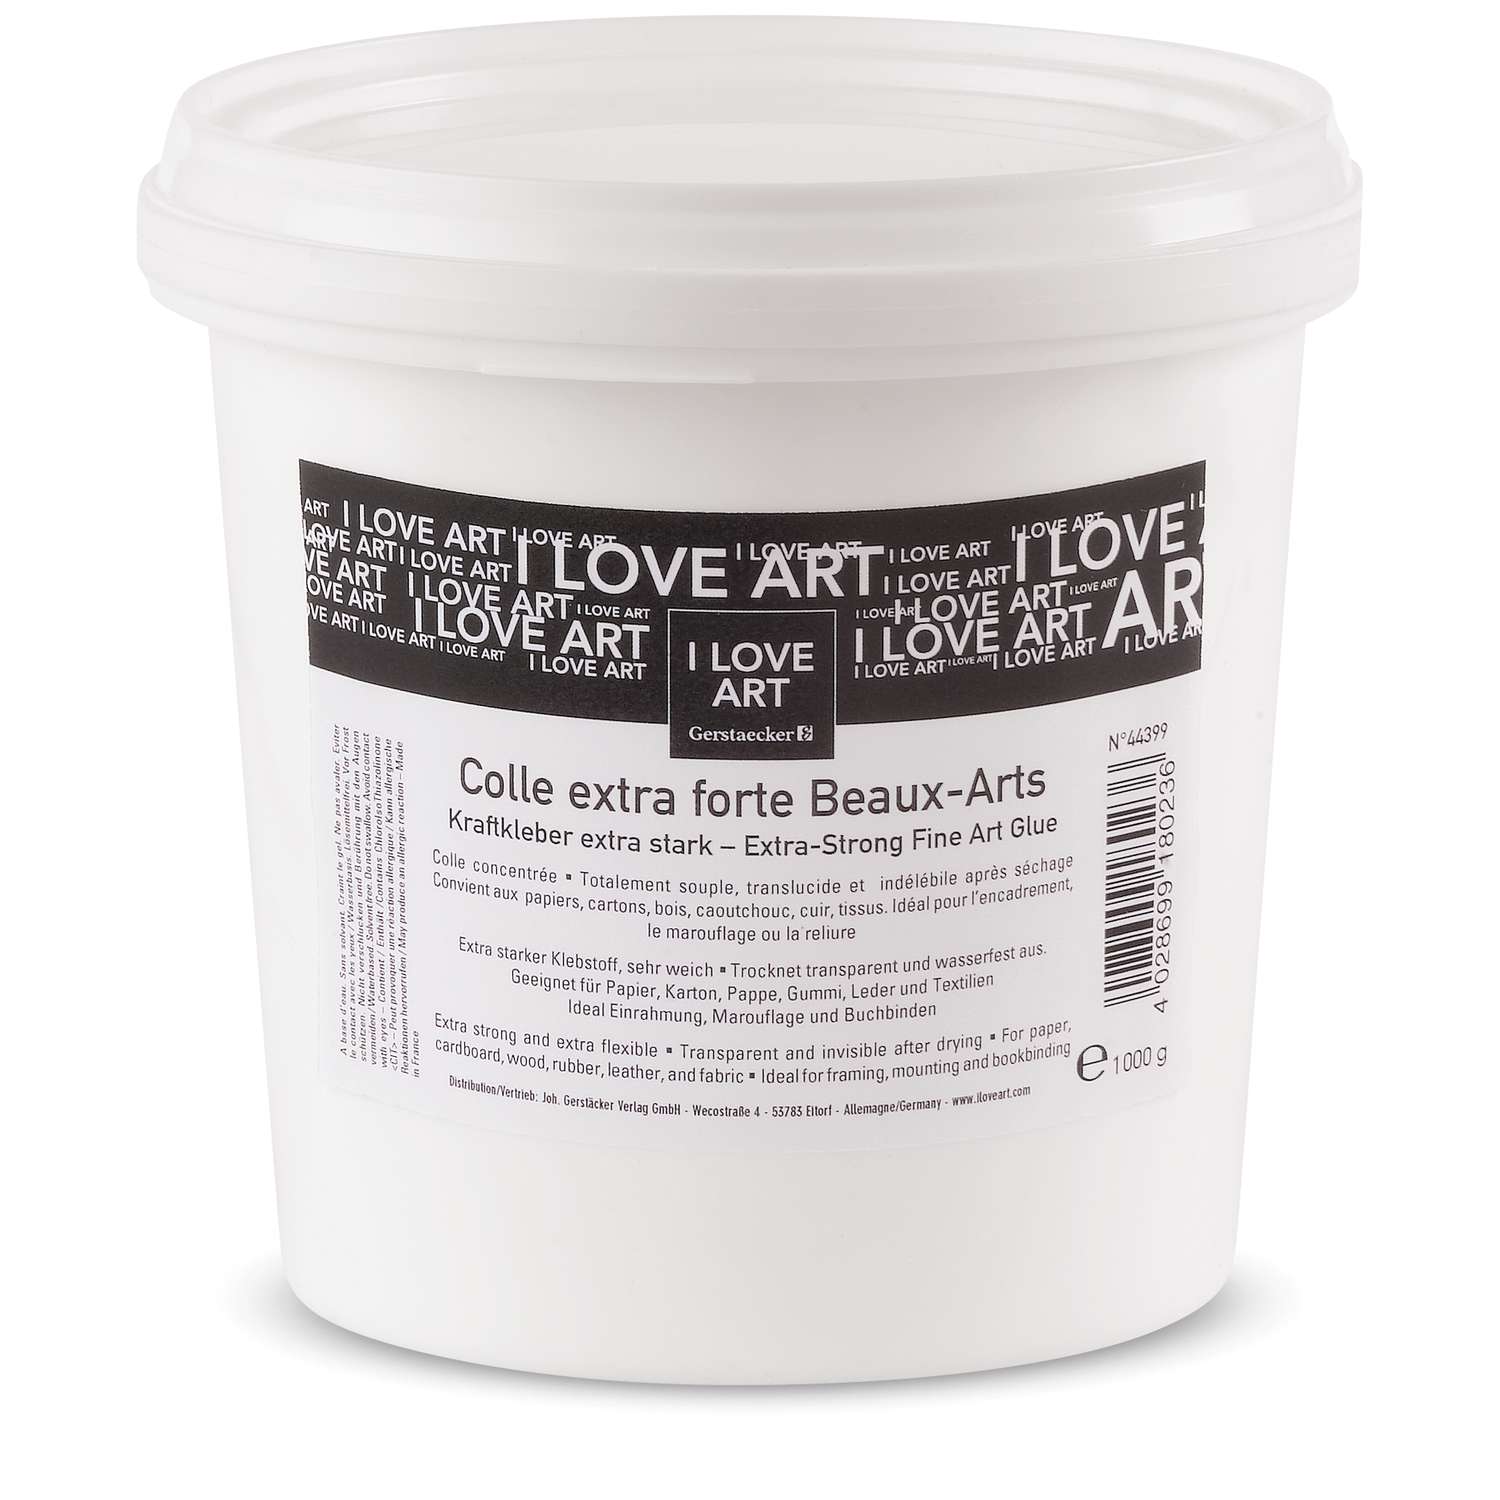 Colle extra forte Beaux-Arts I Love Art